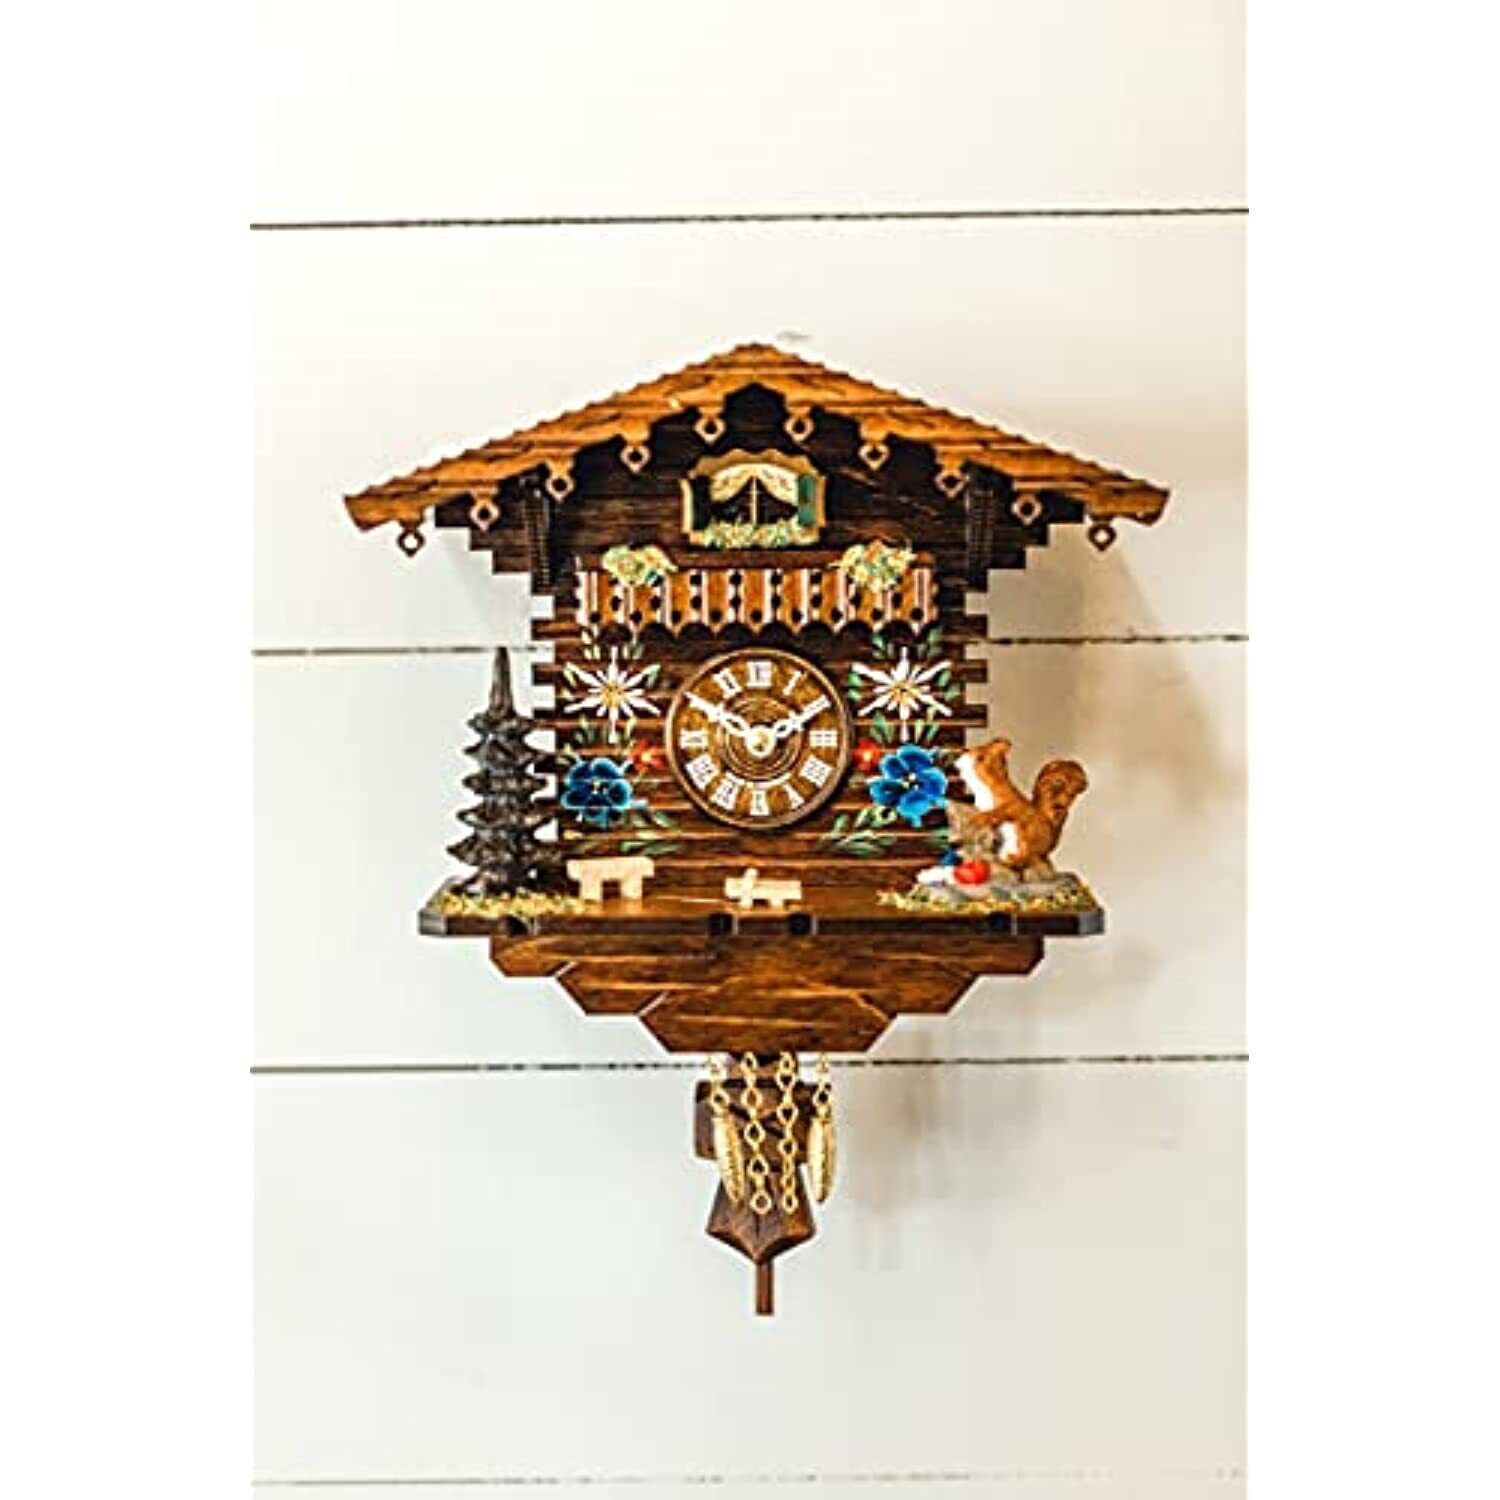 Hermle 71000 Edelweiss Hand Painted Quartz Cuckoo Clock with Squirrel